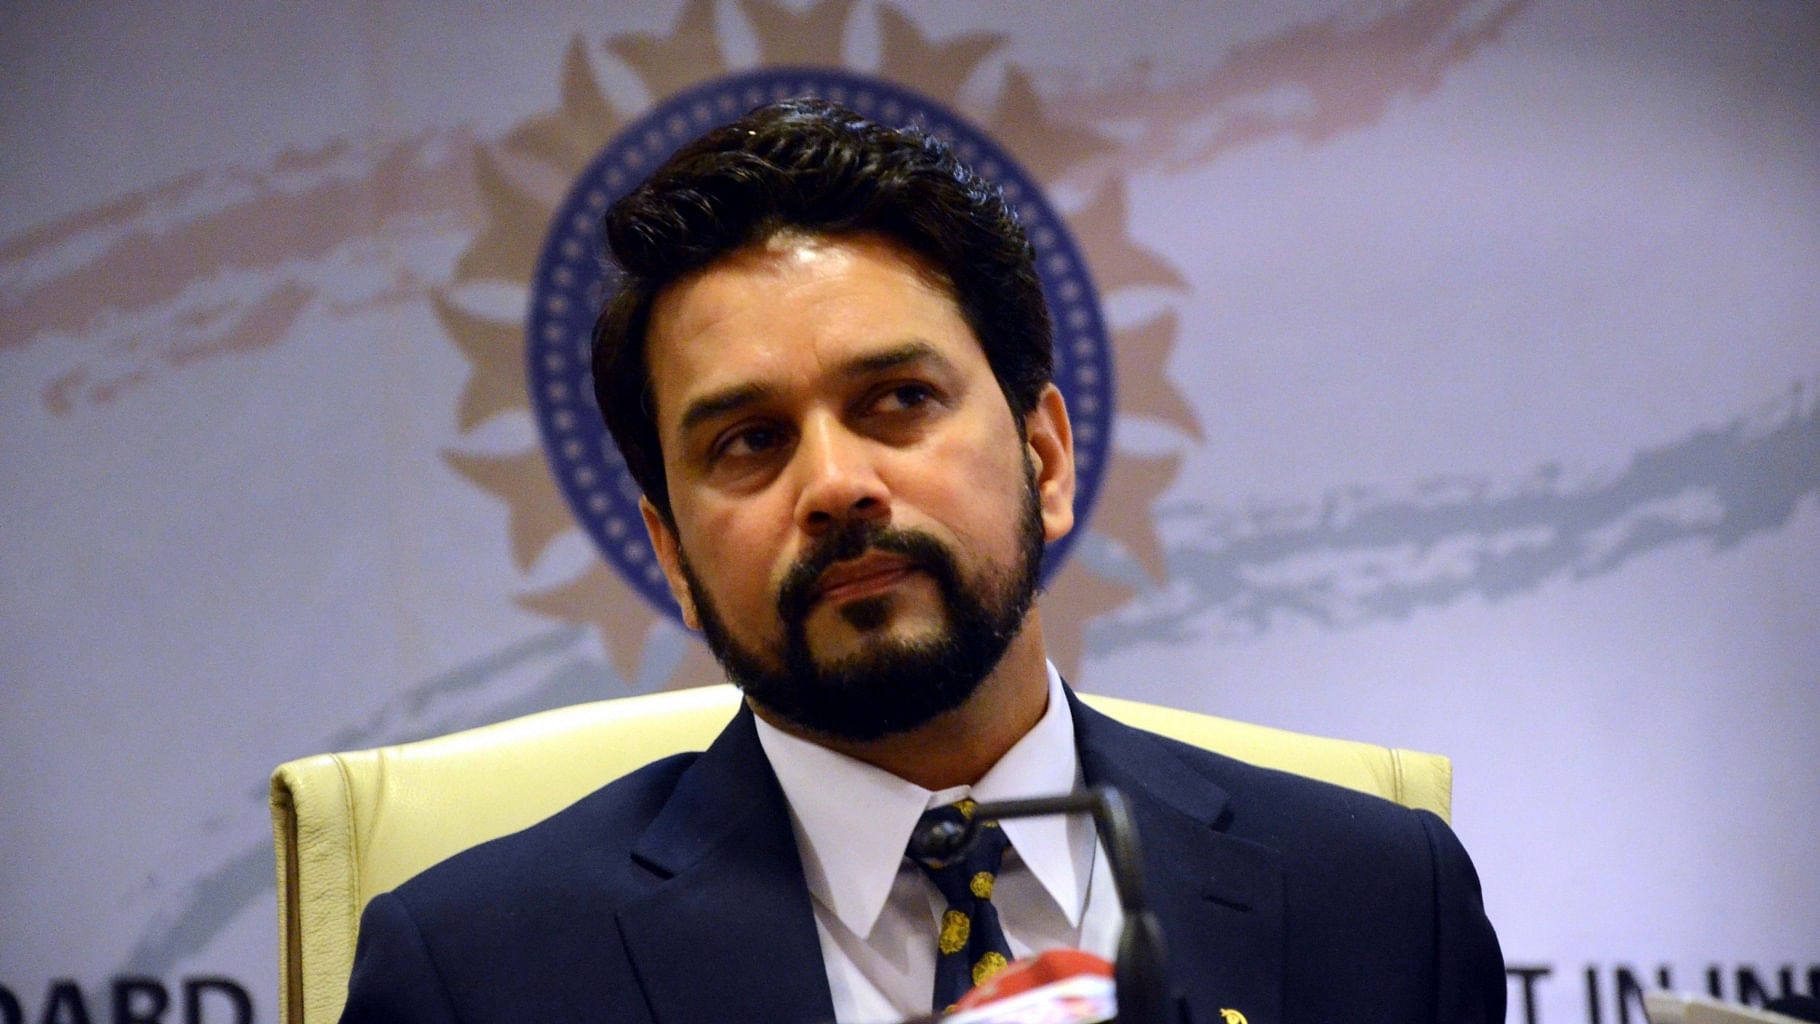 The SC on Monday, 19 November, said it had quashed an FIR against BJP MP Anurag Thakur and others in a case related to alleged encroachment of land for the construction of the Dharamshala cricket stadium by “mistake”.